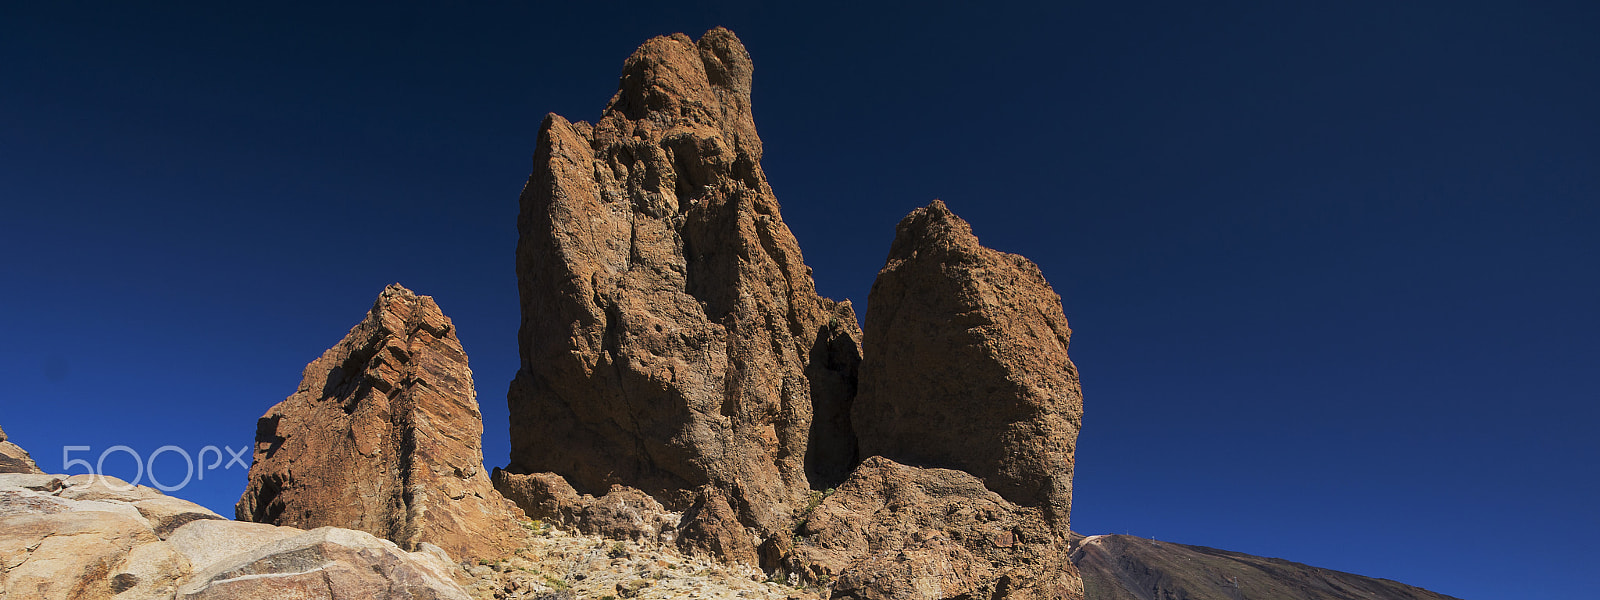 Sony ILCA-77M2 sample photo. The three giants at el tiede photography